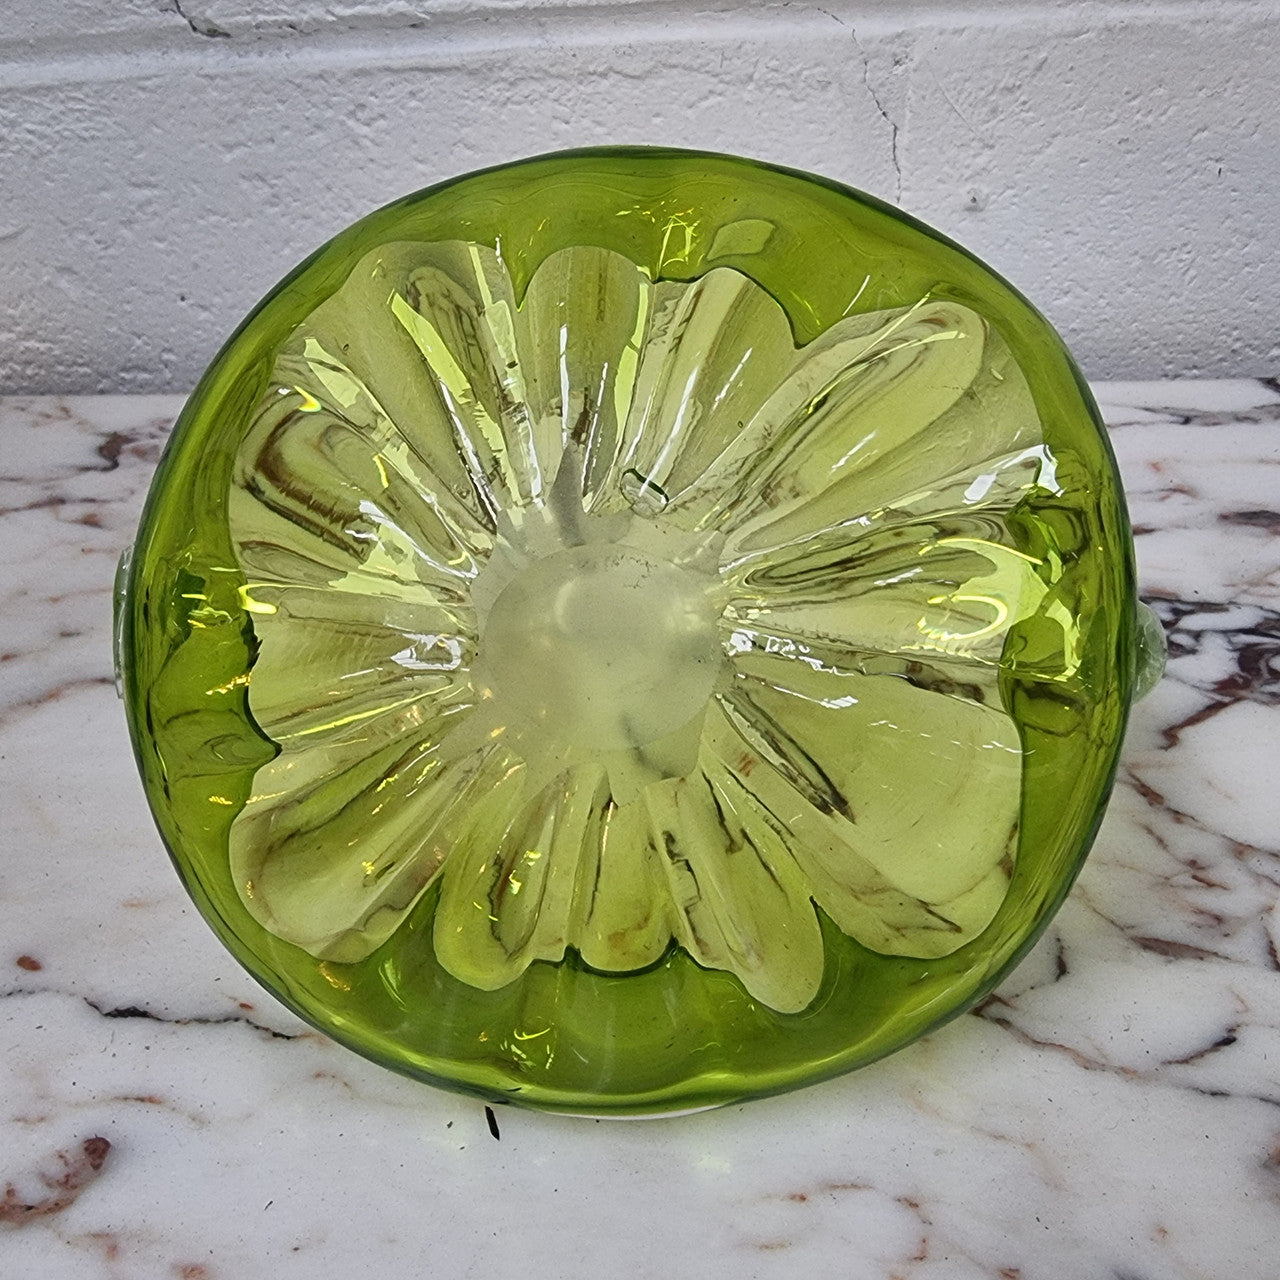 Delightful art glass vintage basket. Green glass bowl and clear handle.